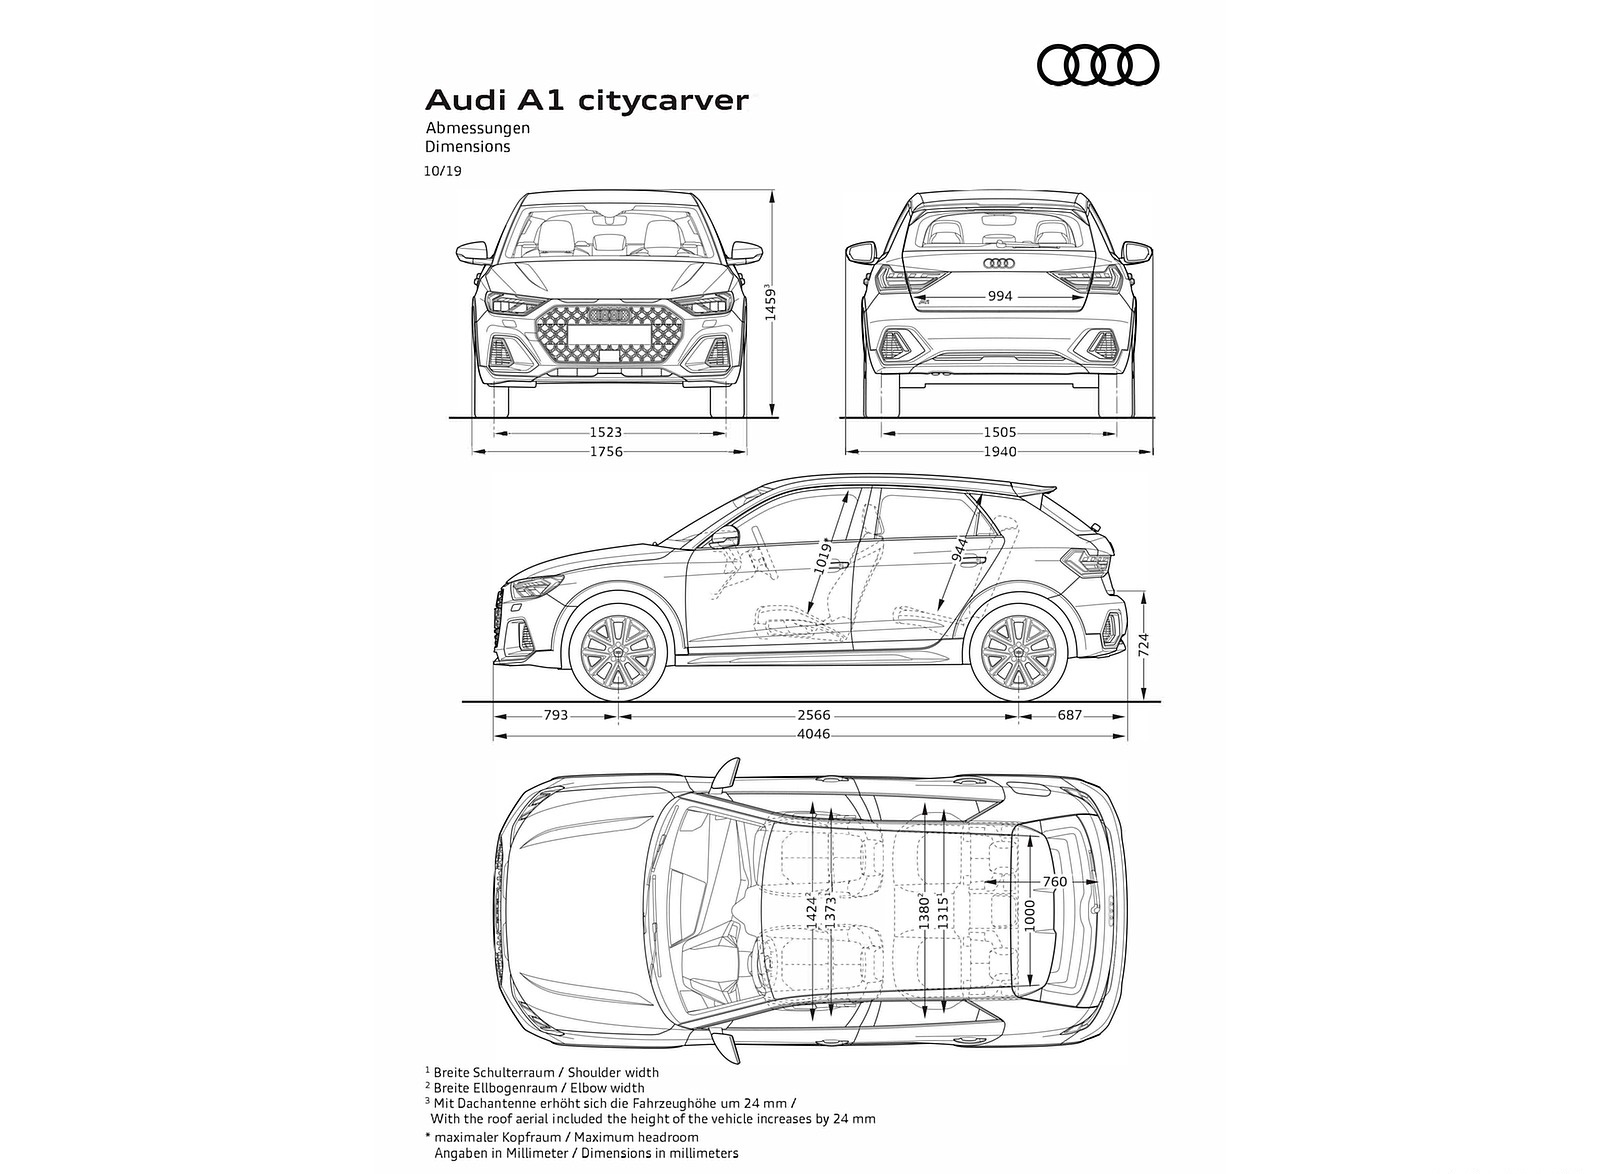 2020 Audi A1 Citycarver Dimensions Wallpapers #64 of 97